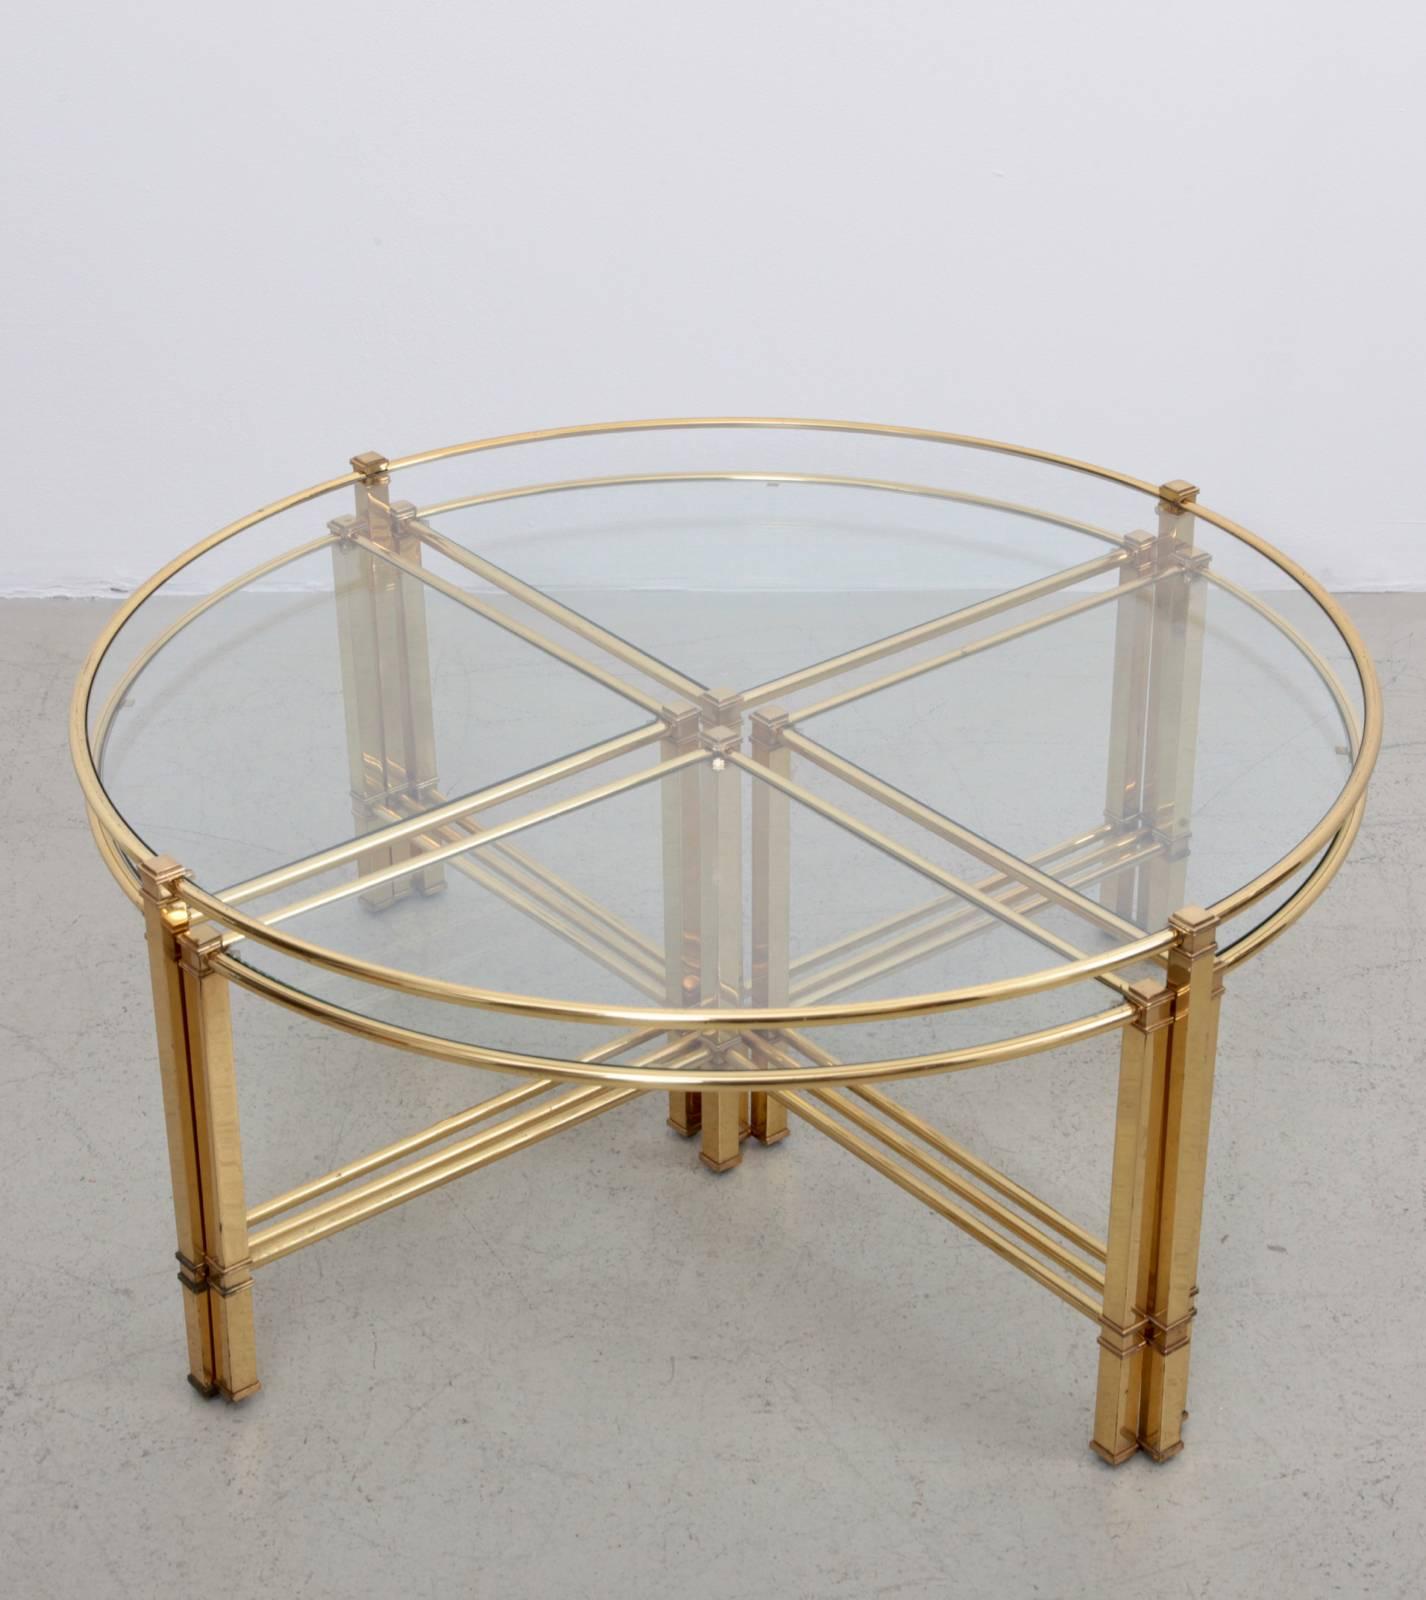 Beautiful round coffee table with four nesting tables in brass by Maison Charles. The glass plates are loosely inserted to create the table surfaces. The table is in very good condition.

